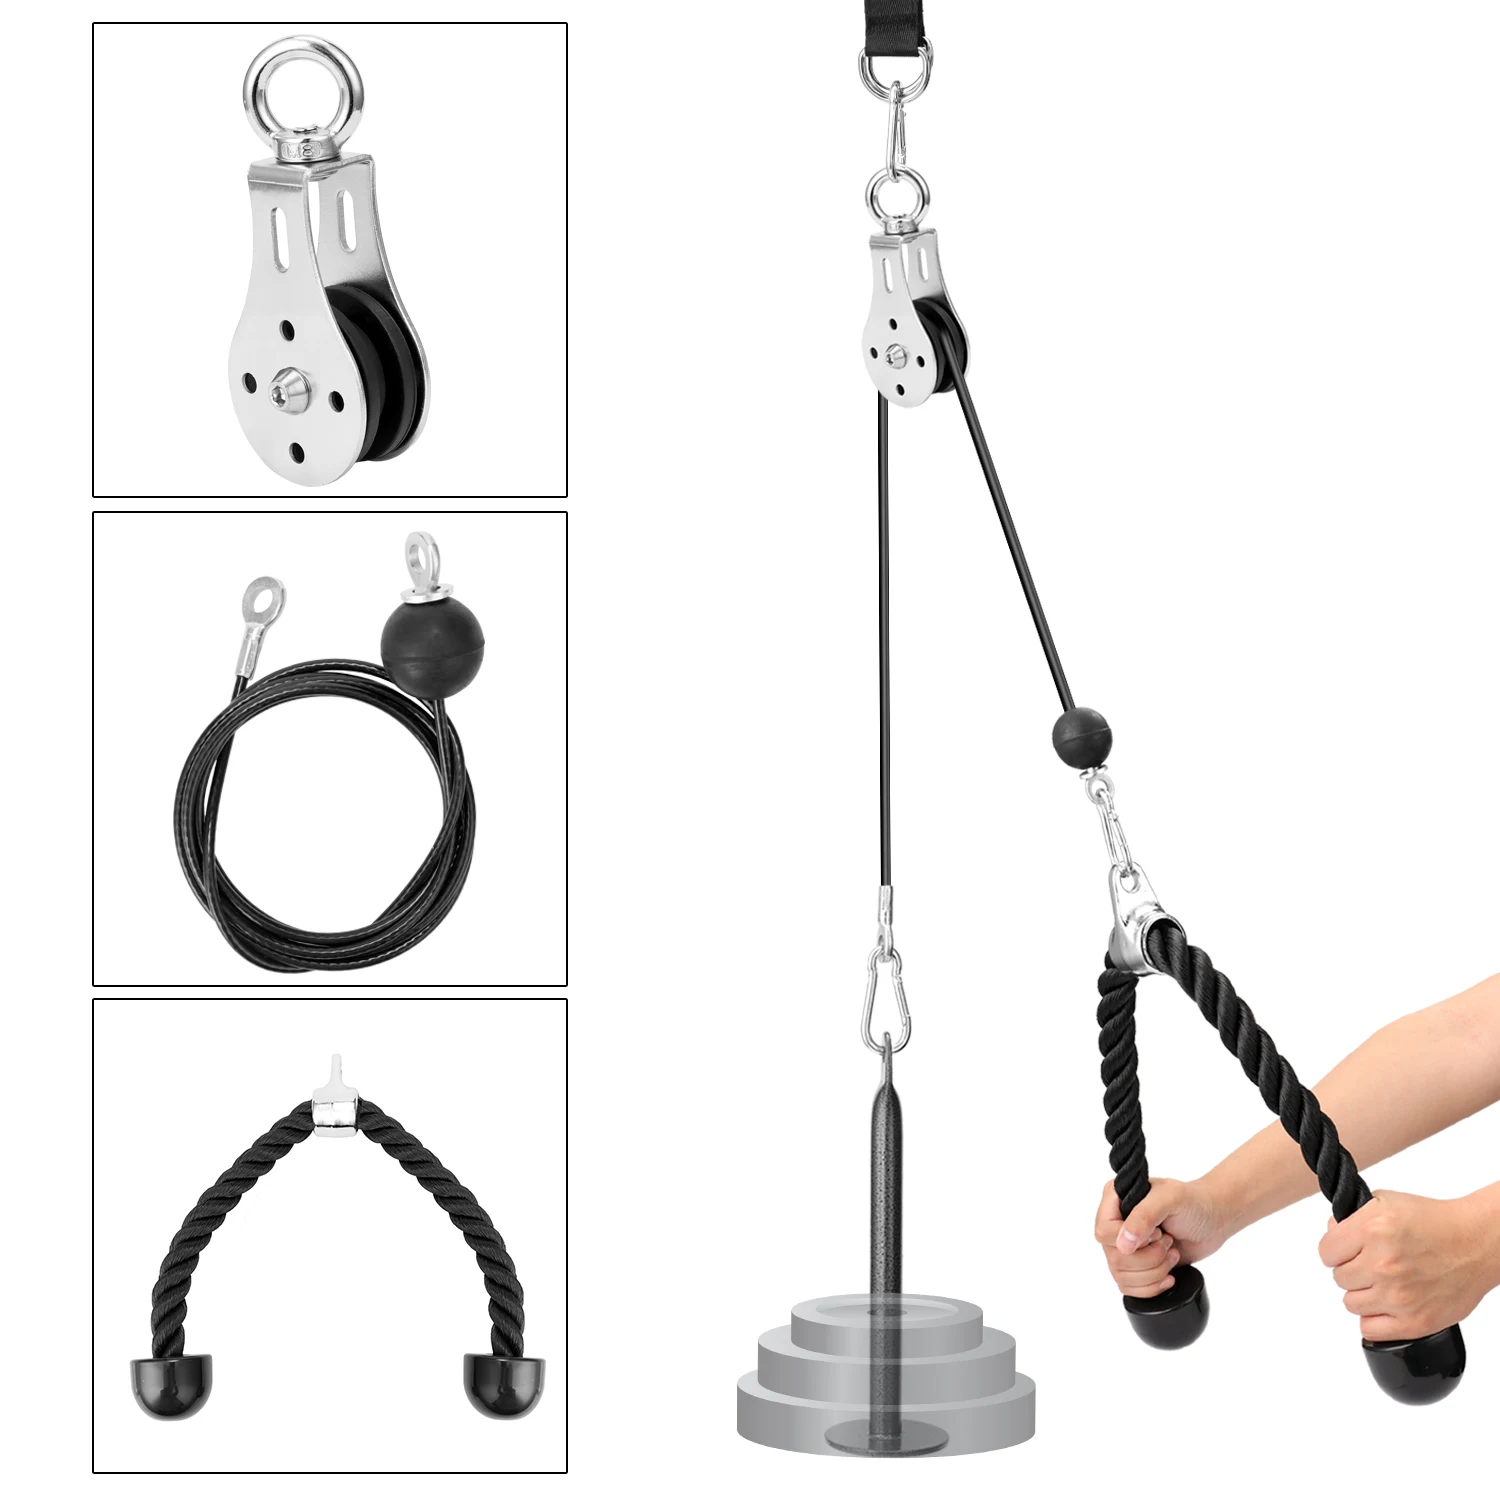 DIY Fitness Pulley Cable Gym Workout Equipment Machine Attachment Accessories 